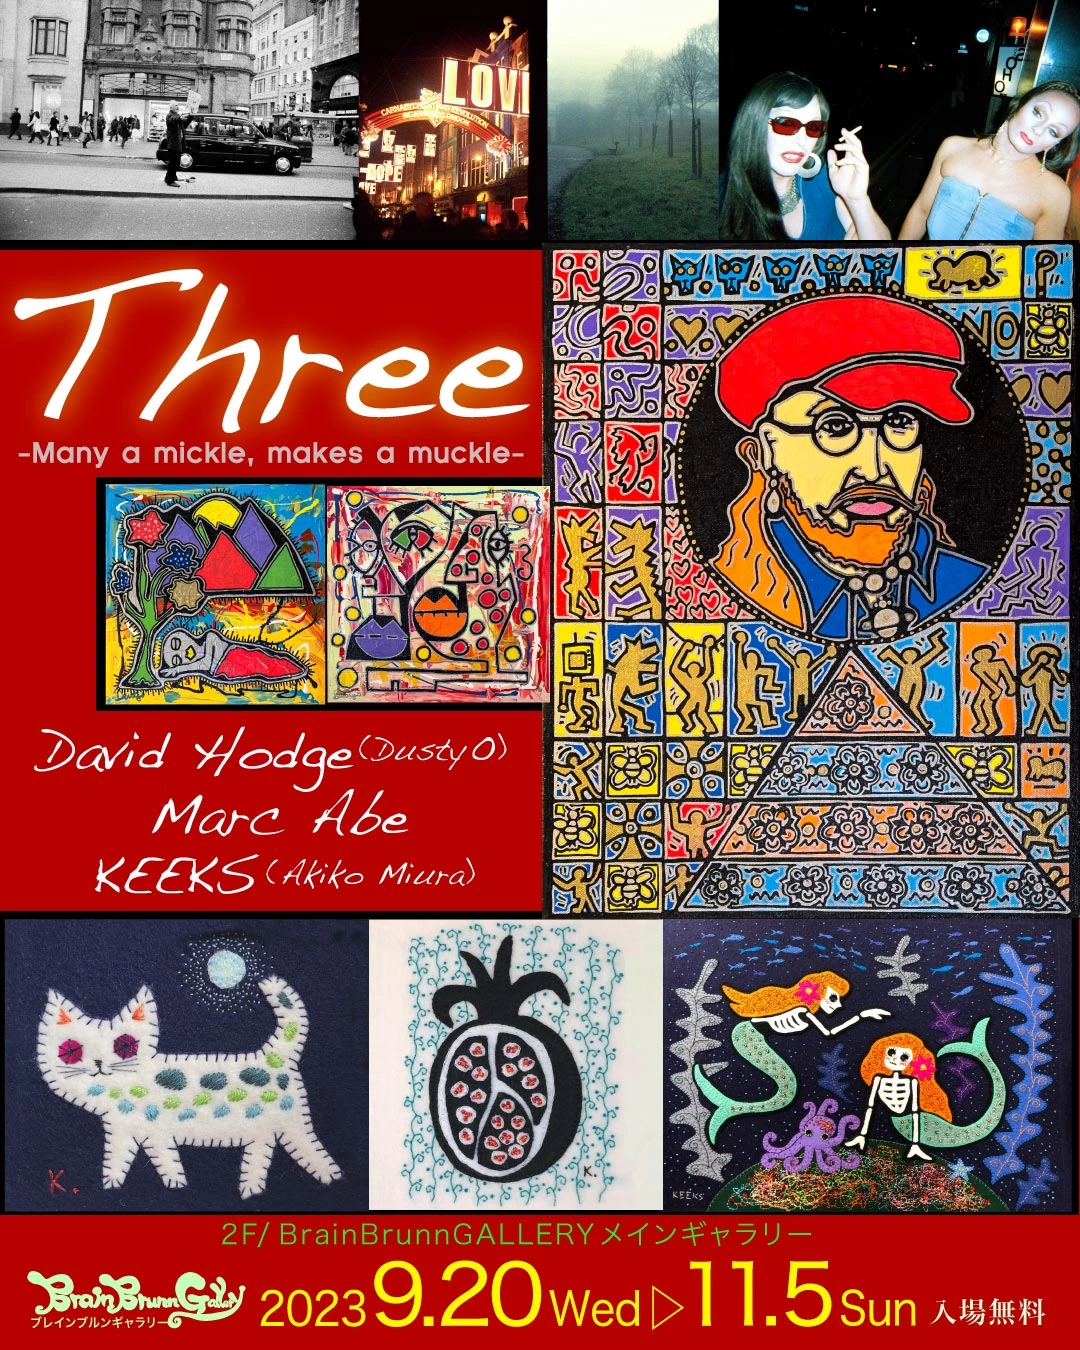 【THREE -Many a mickle, makes a muckle-】David & Marc & Keeks 3人展